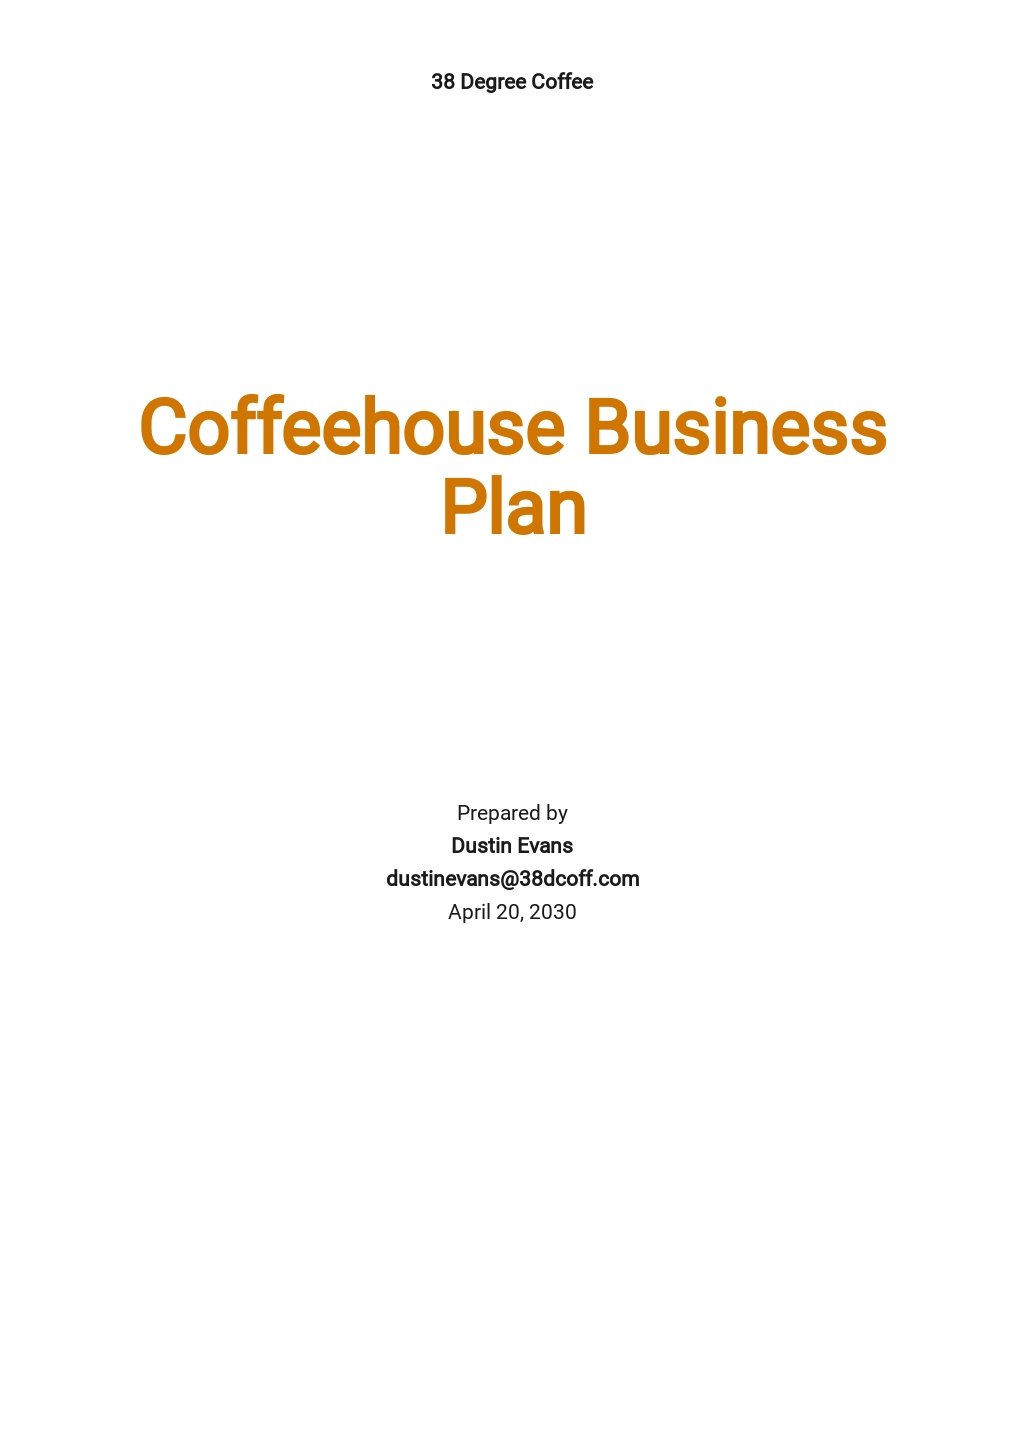 is coffee shop business plan